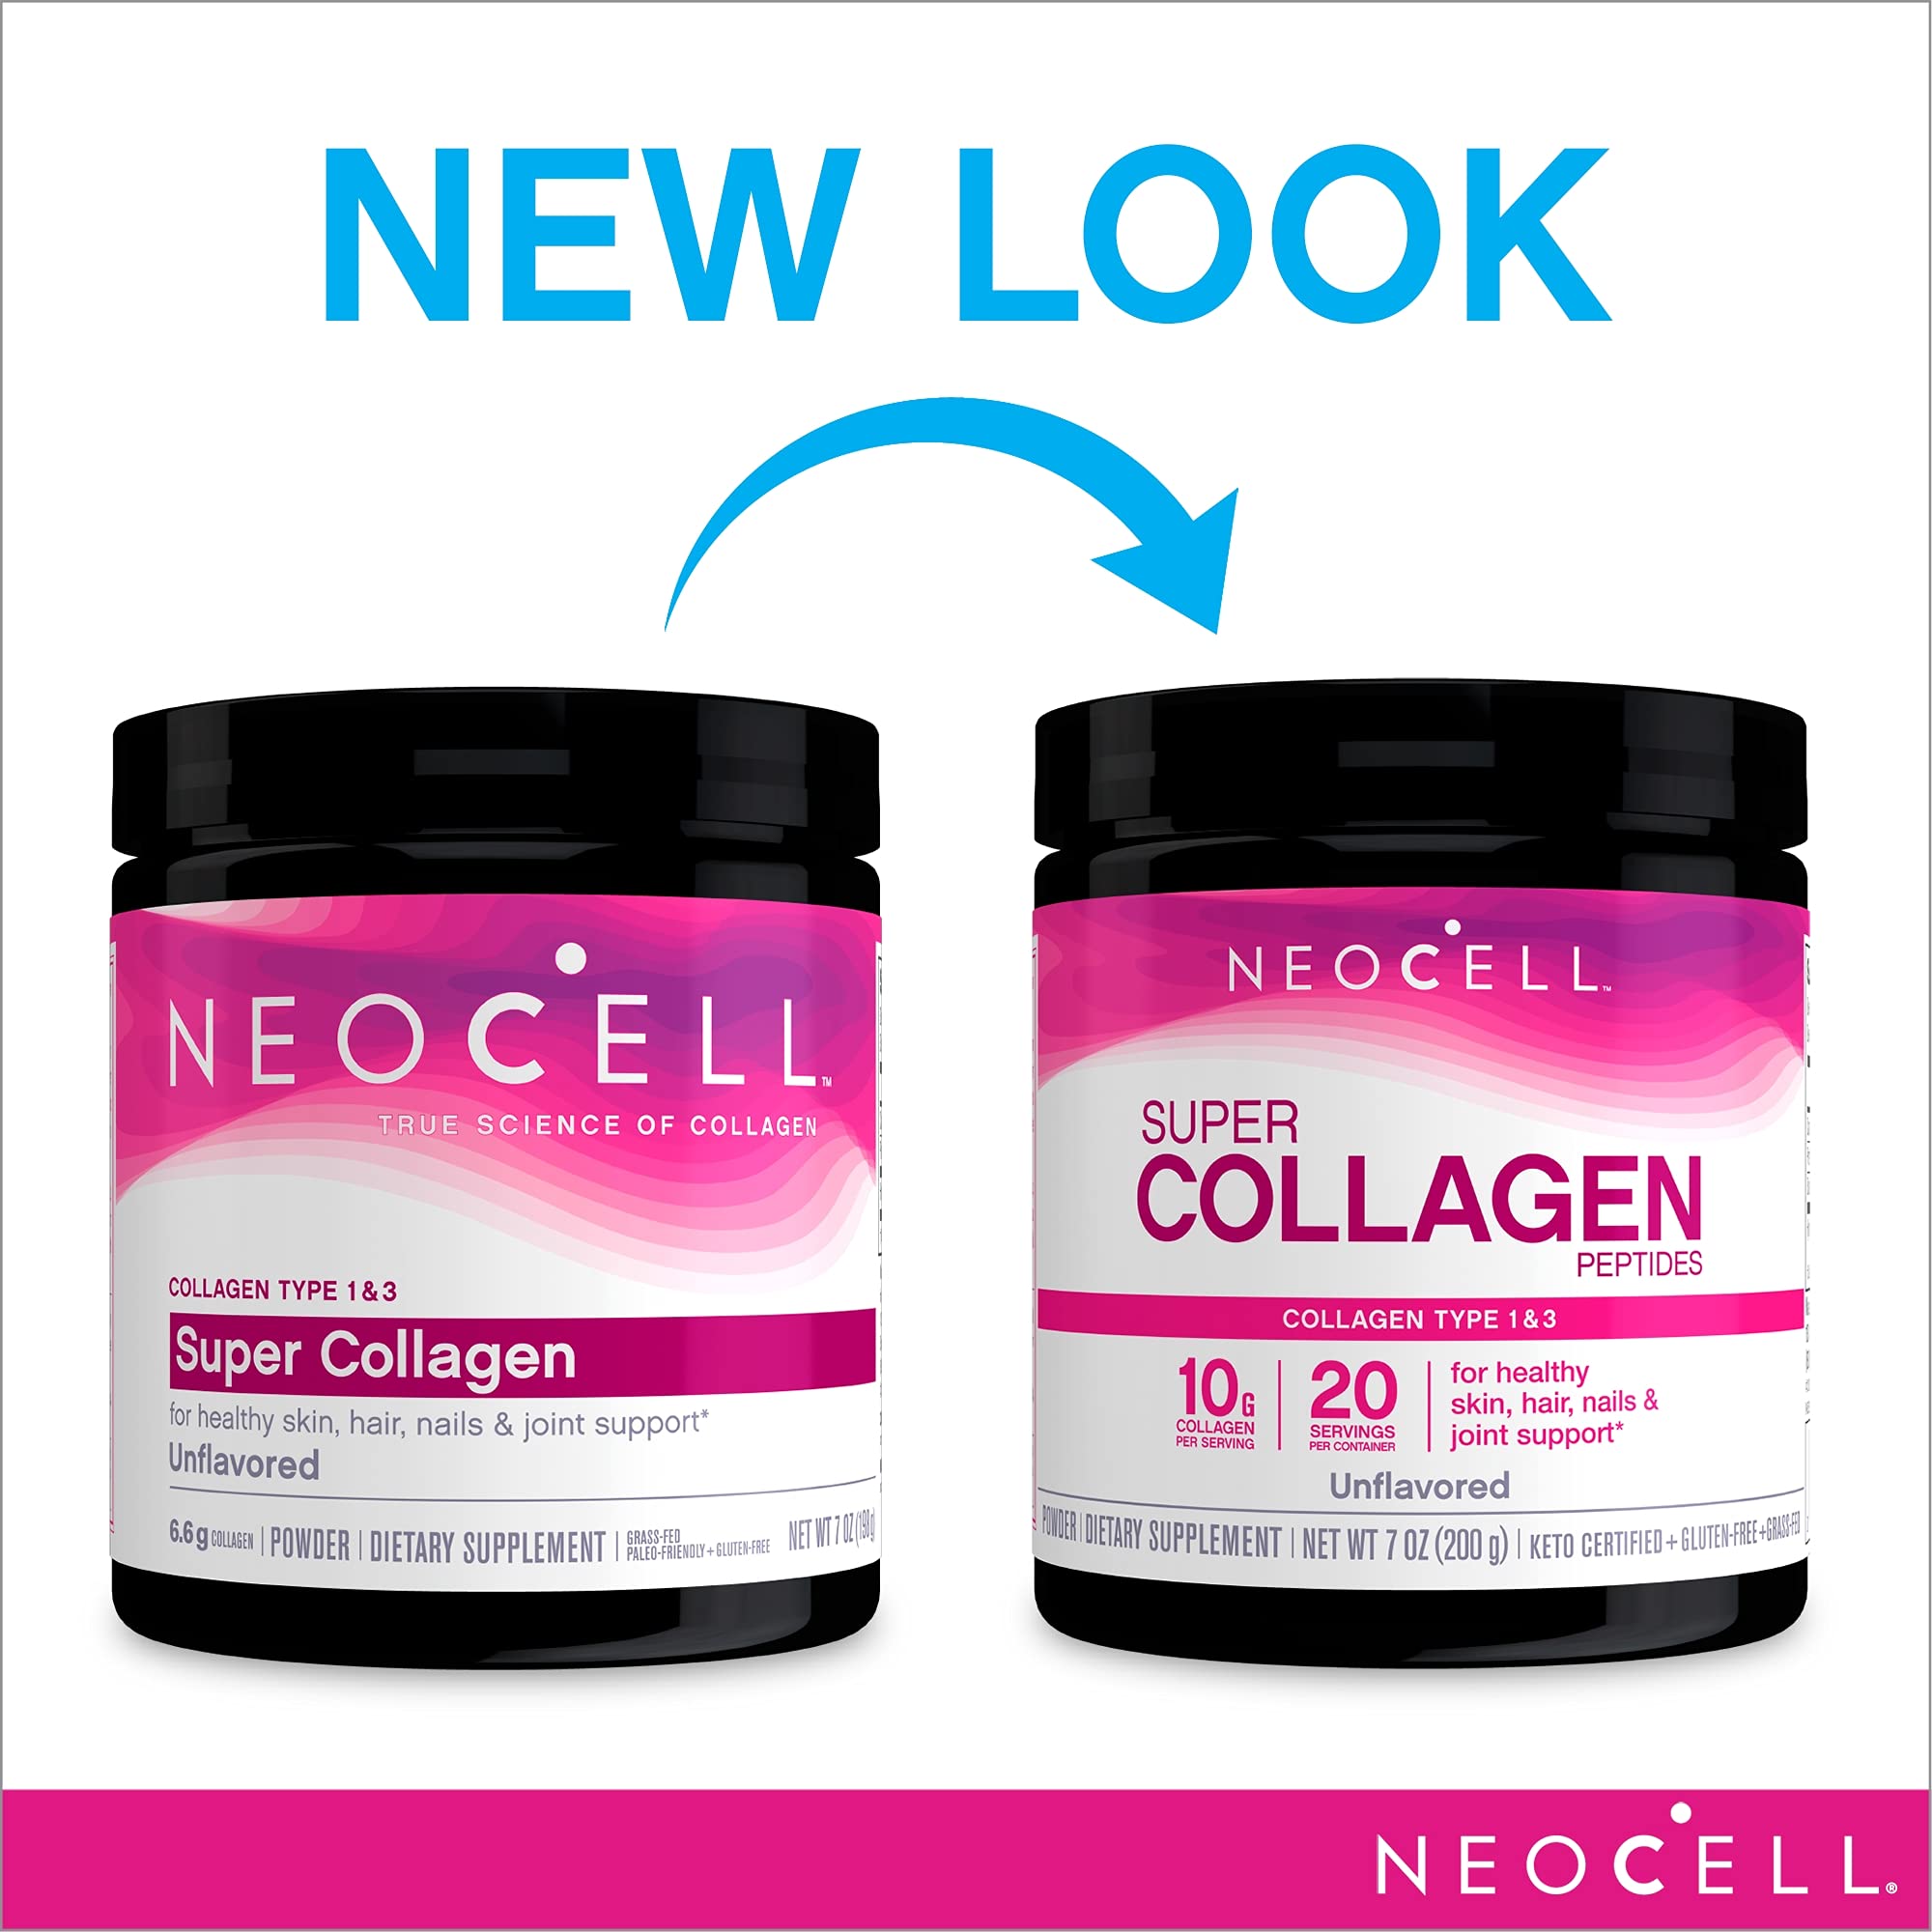 NeoCell Super Collagen Powder, 10g Collagen Peptides per Serving, Gluten Free, Keto Friendly, Non-GMO, Grass Fed, Paleo Friendly, Healthy Hair, Skin, Nails & Joints, Unflavored, 7 Oz